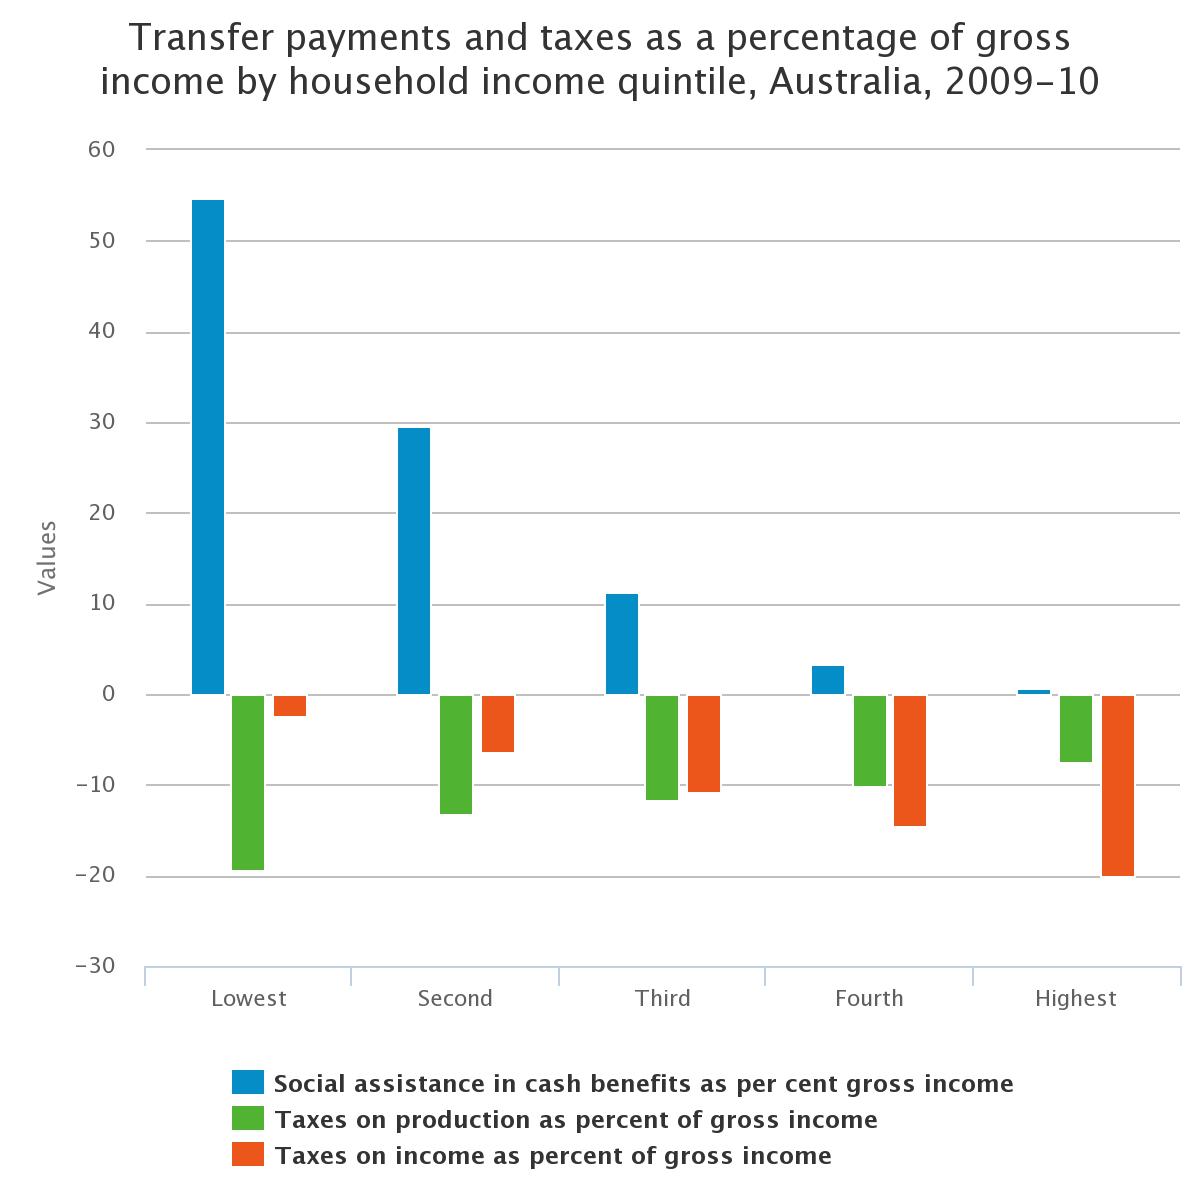 Transfer payments and taxes as a percentage of gross income by household income quintile, Australia, 2009-10